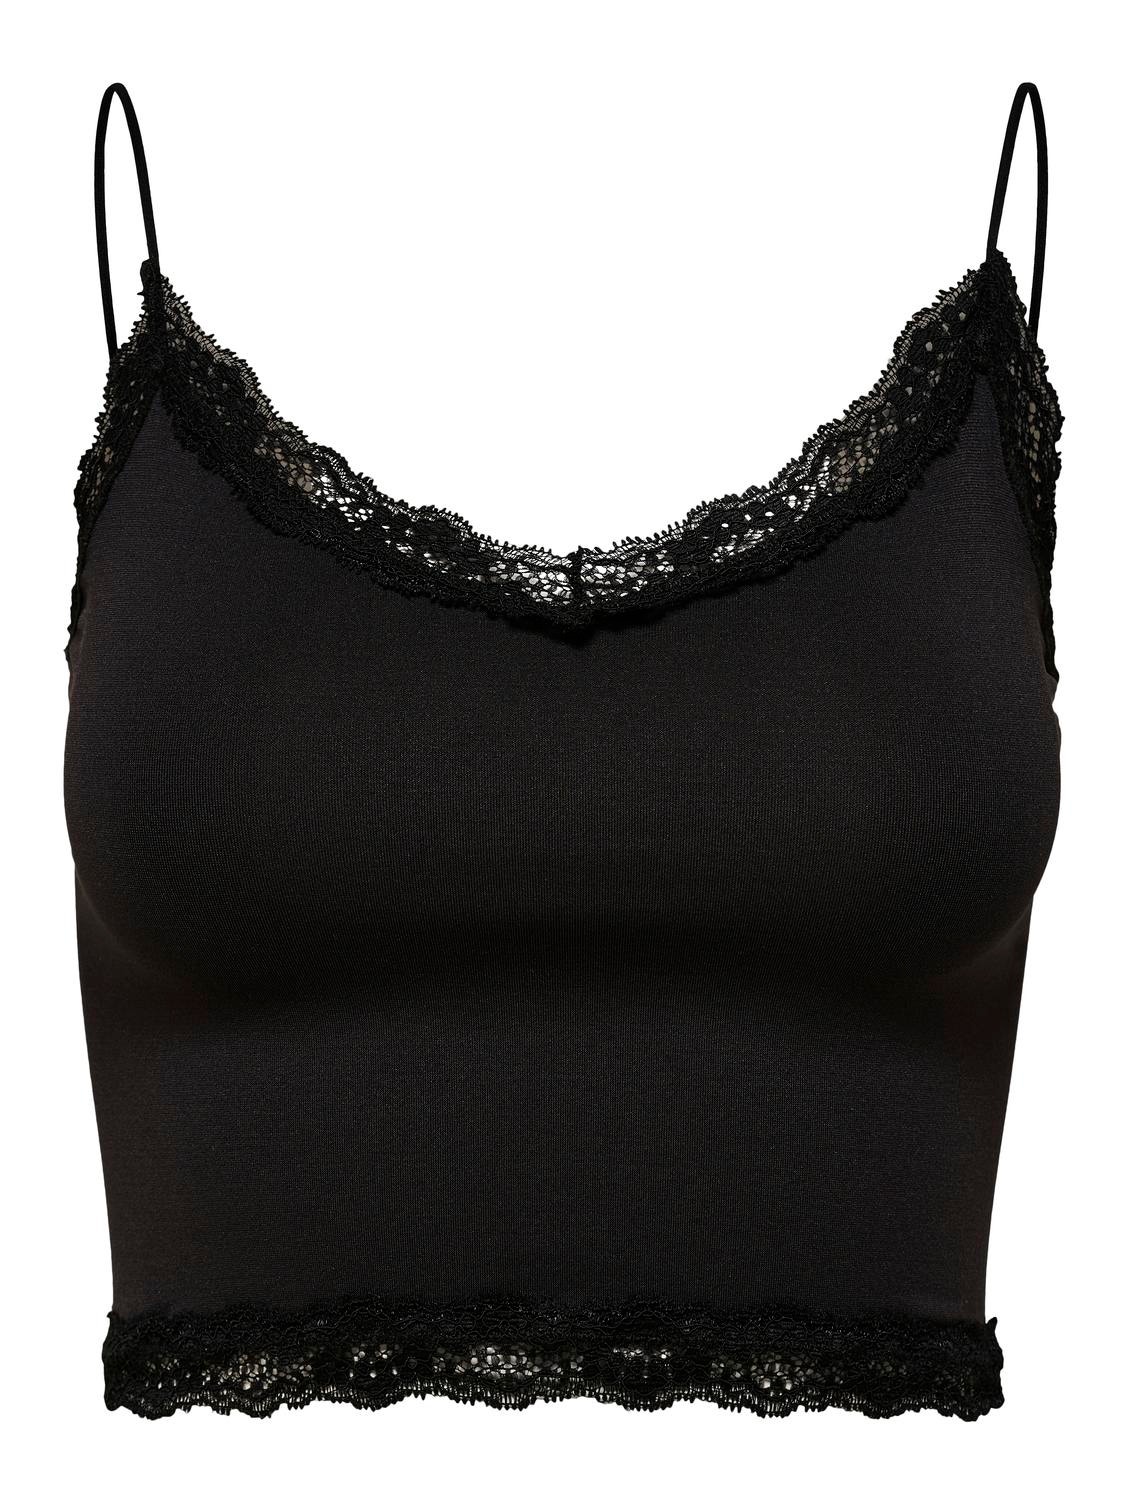 Cropped top with lace edges, Black